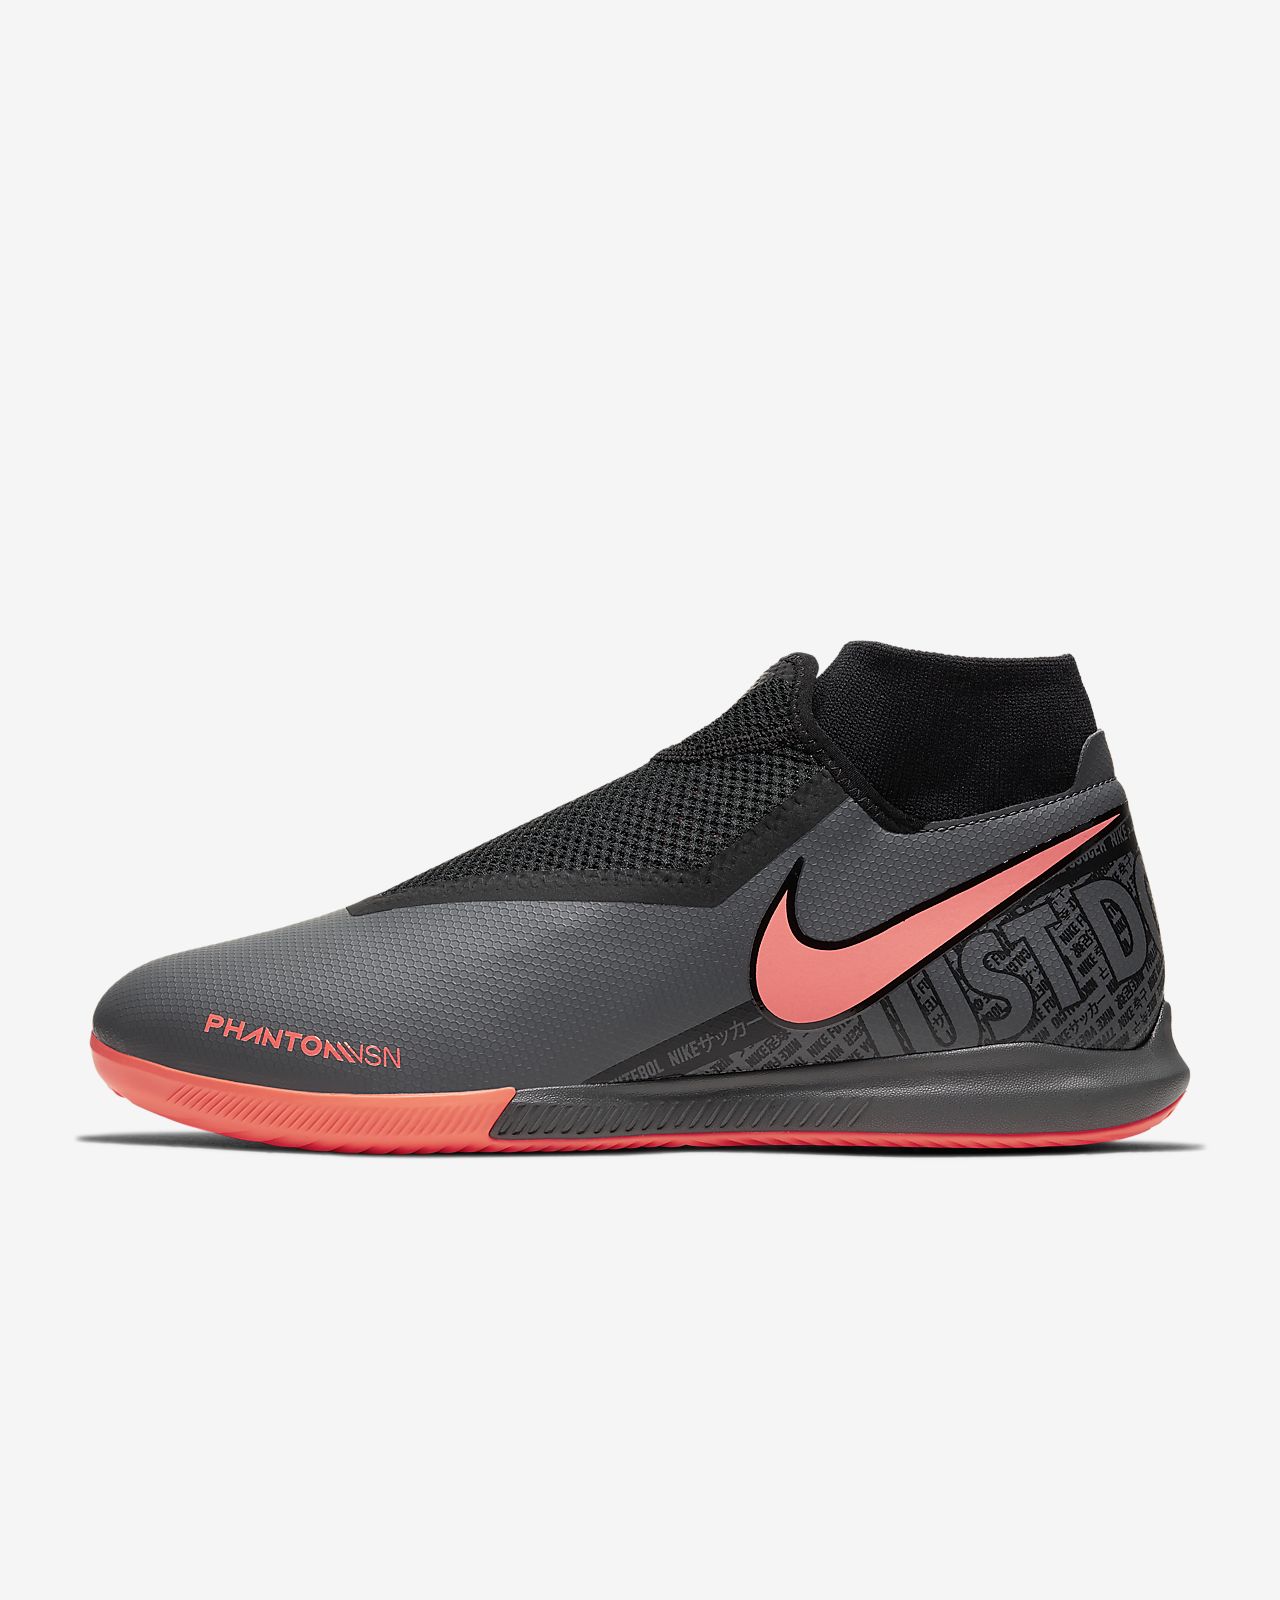 Nike Phantom Vision Academy Dynamic Fit IC Indoor/Court Football Shoe